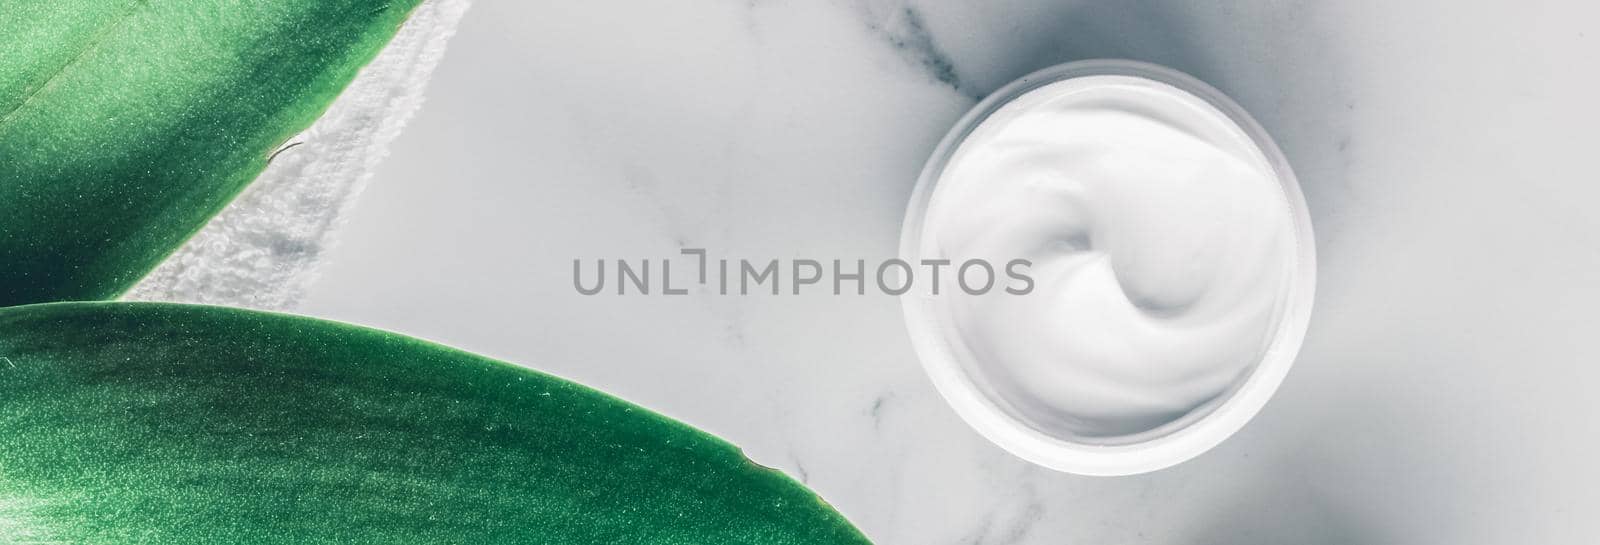 Organic beauty cosmetics on marble, home spa flatlay background by Anneleven